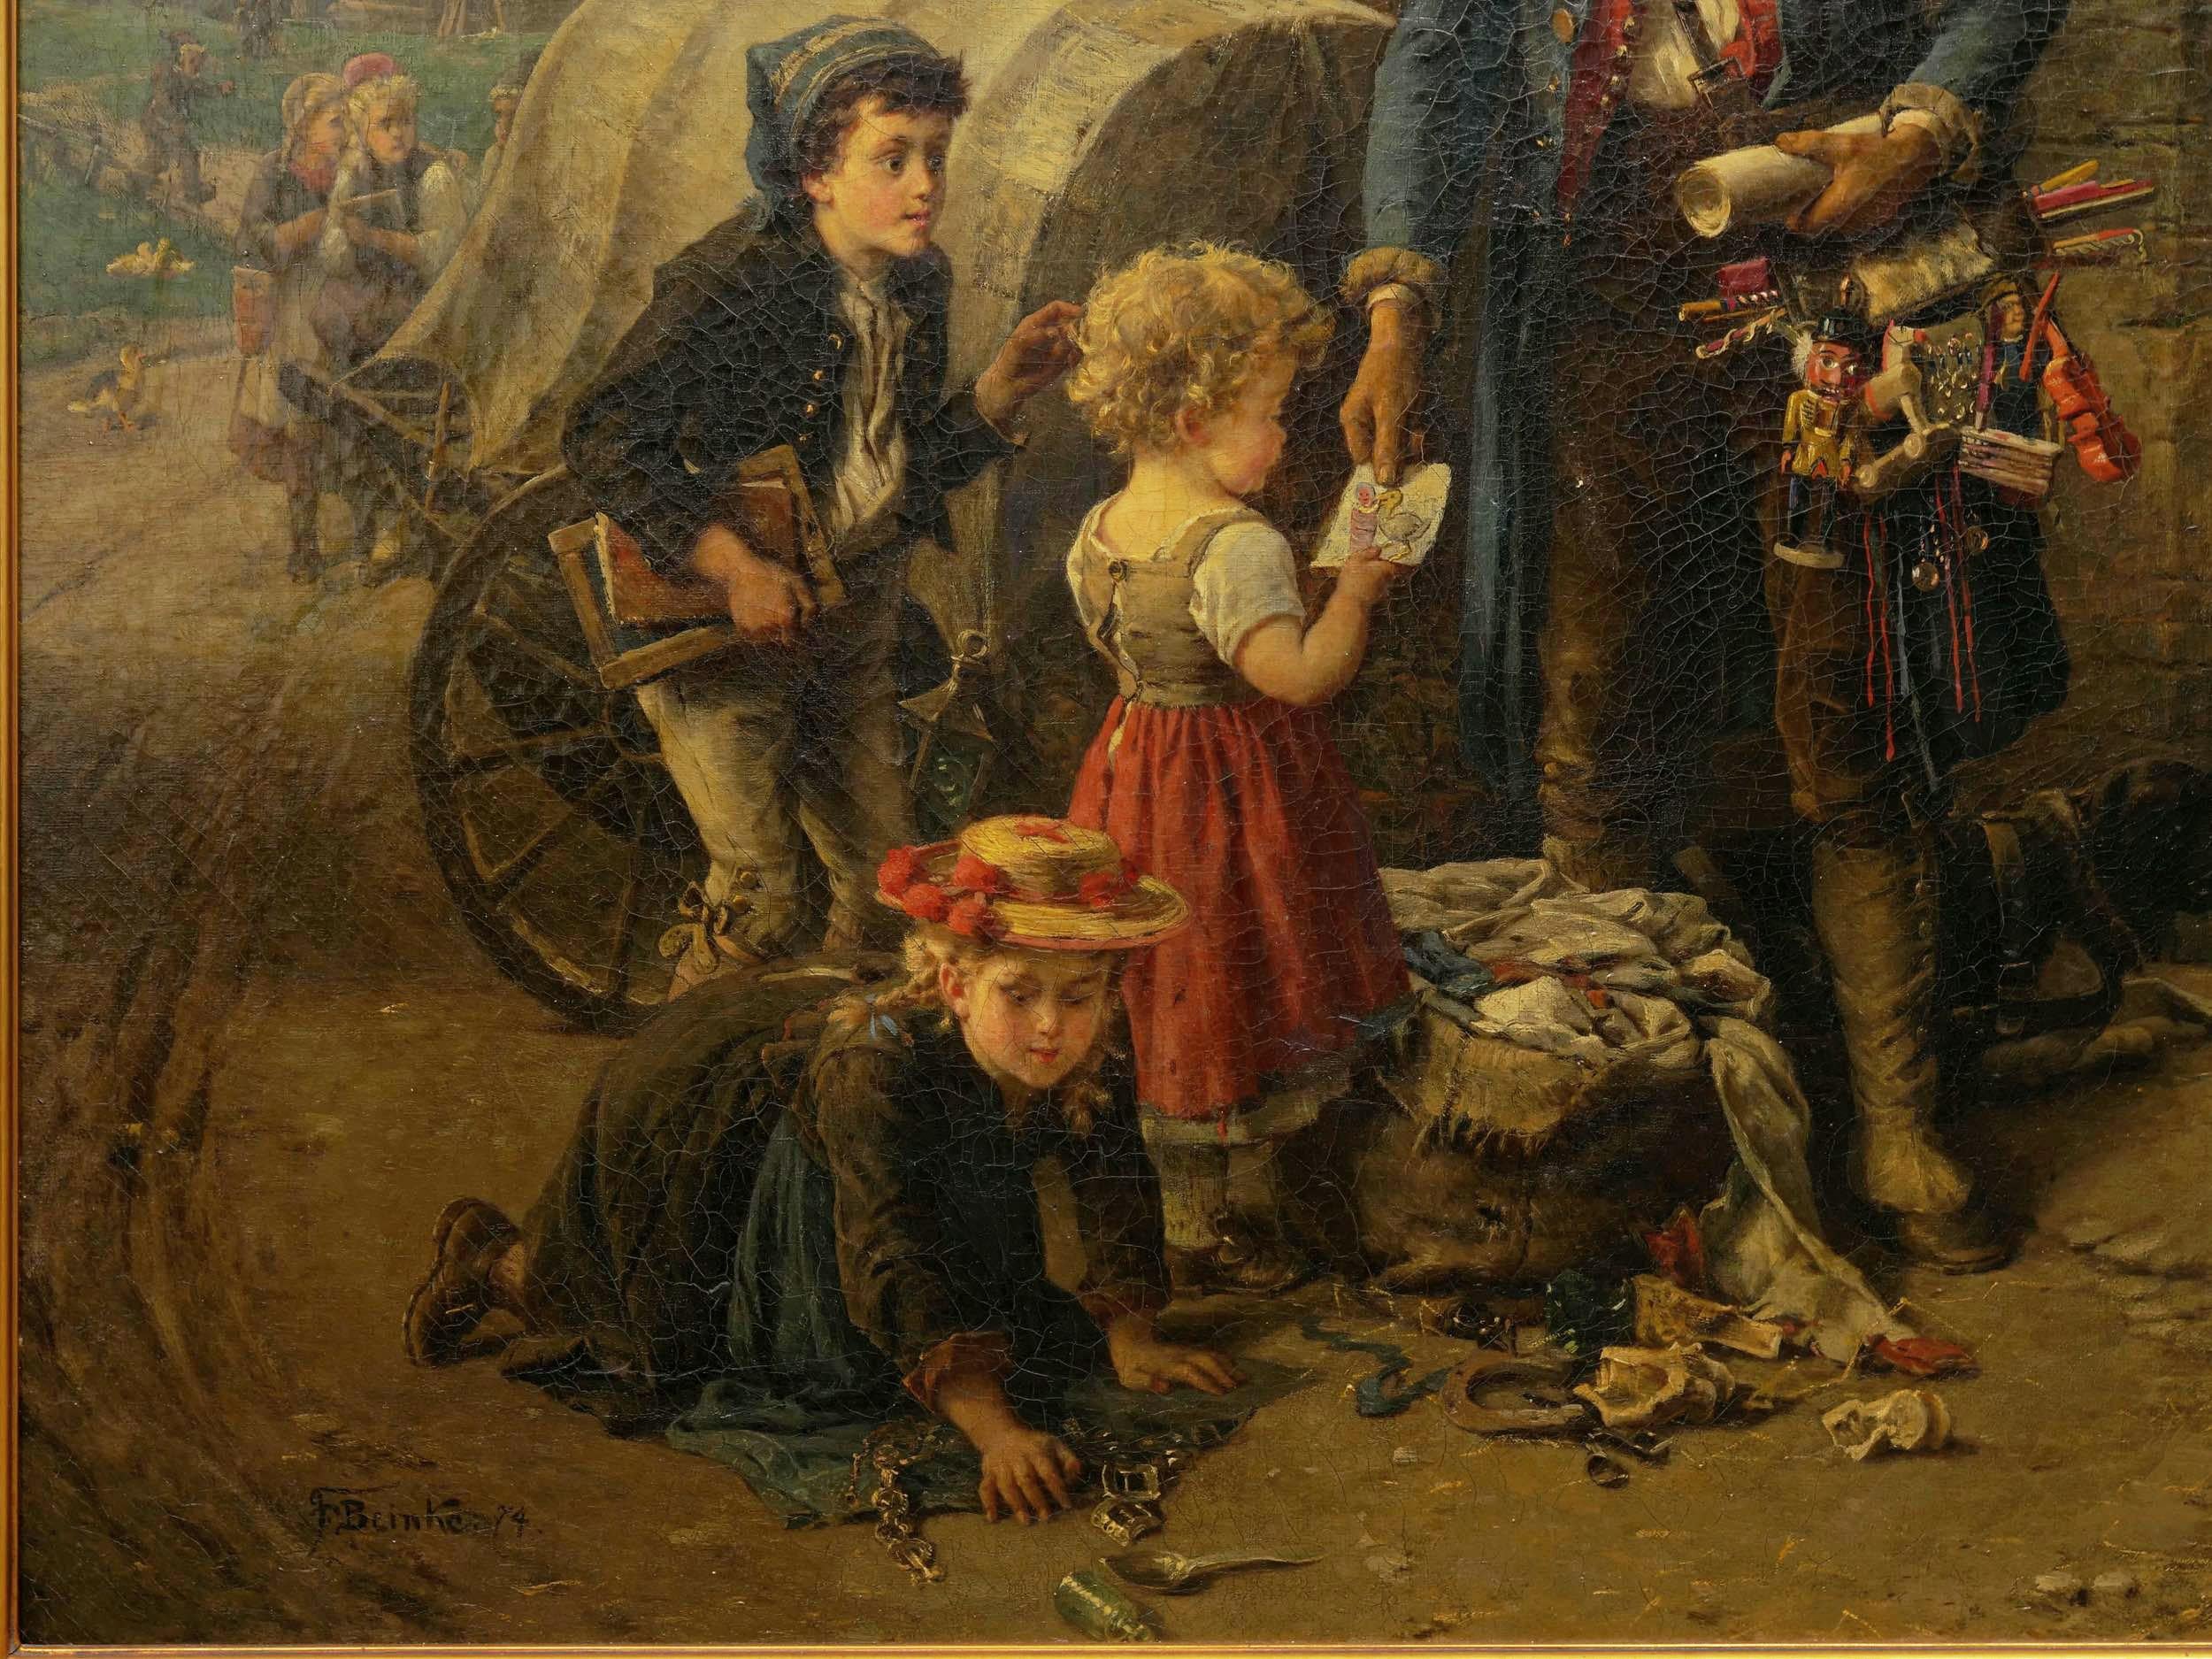 Canvas “The Toy Seller” (1874) Antique Oil Painting by Fritz Beinke (German, 1842-1907